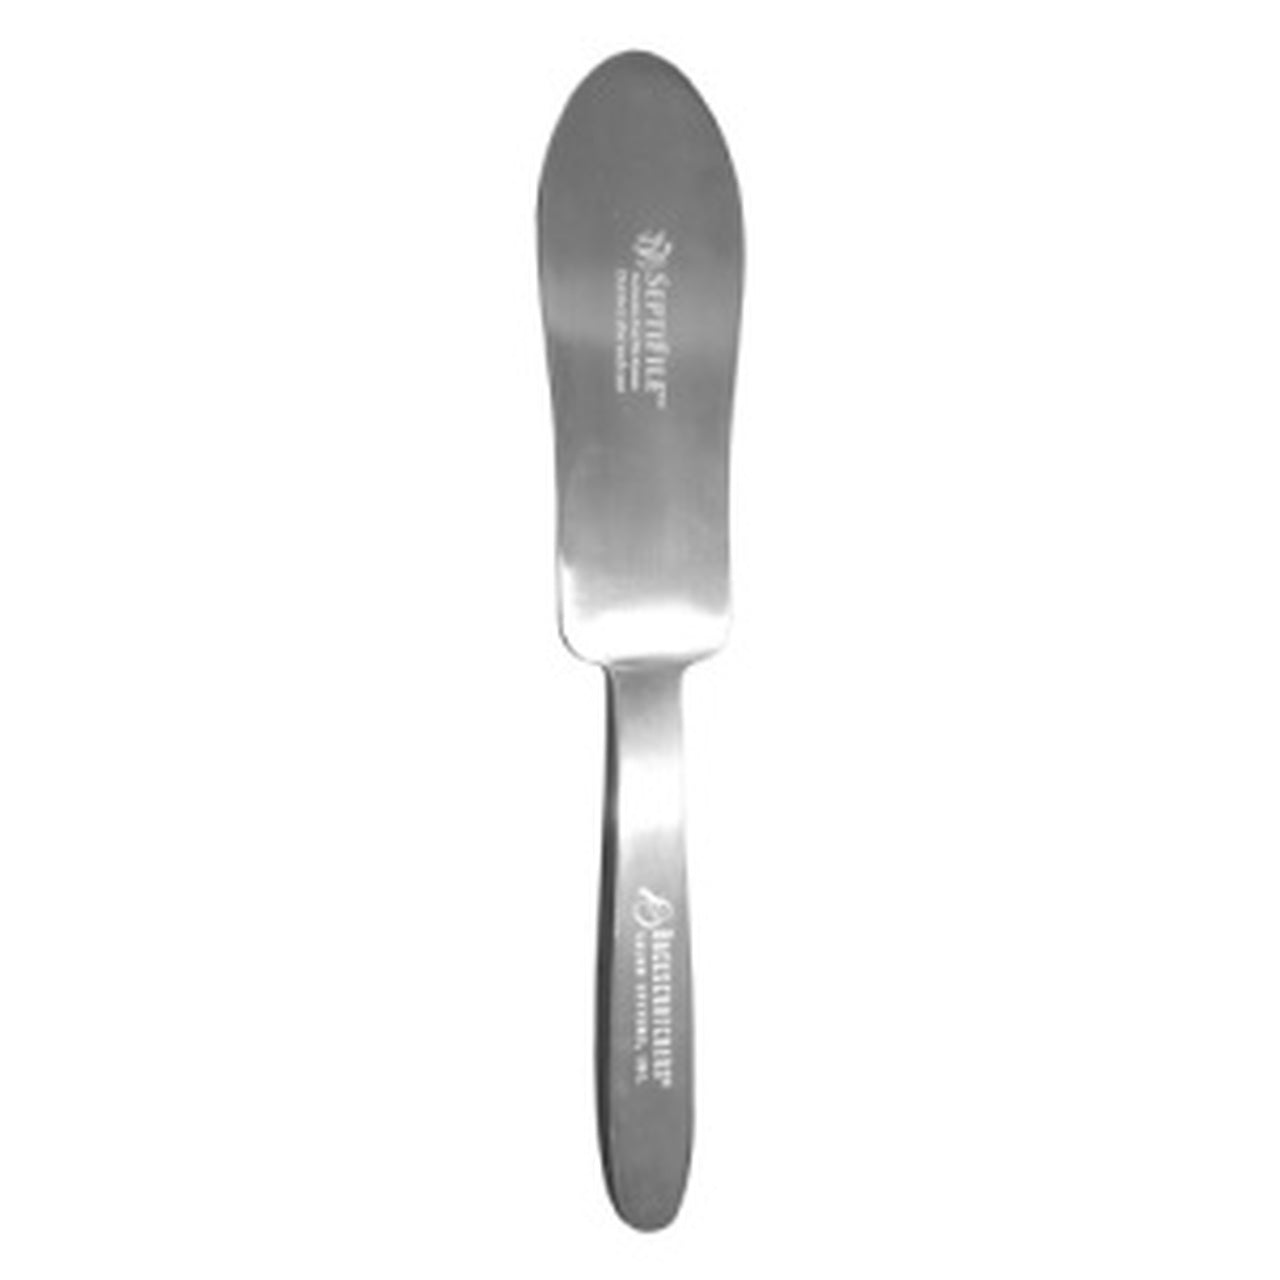 Backscratchers SeptiFile Stainless Steel Foot File